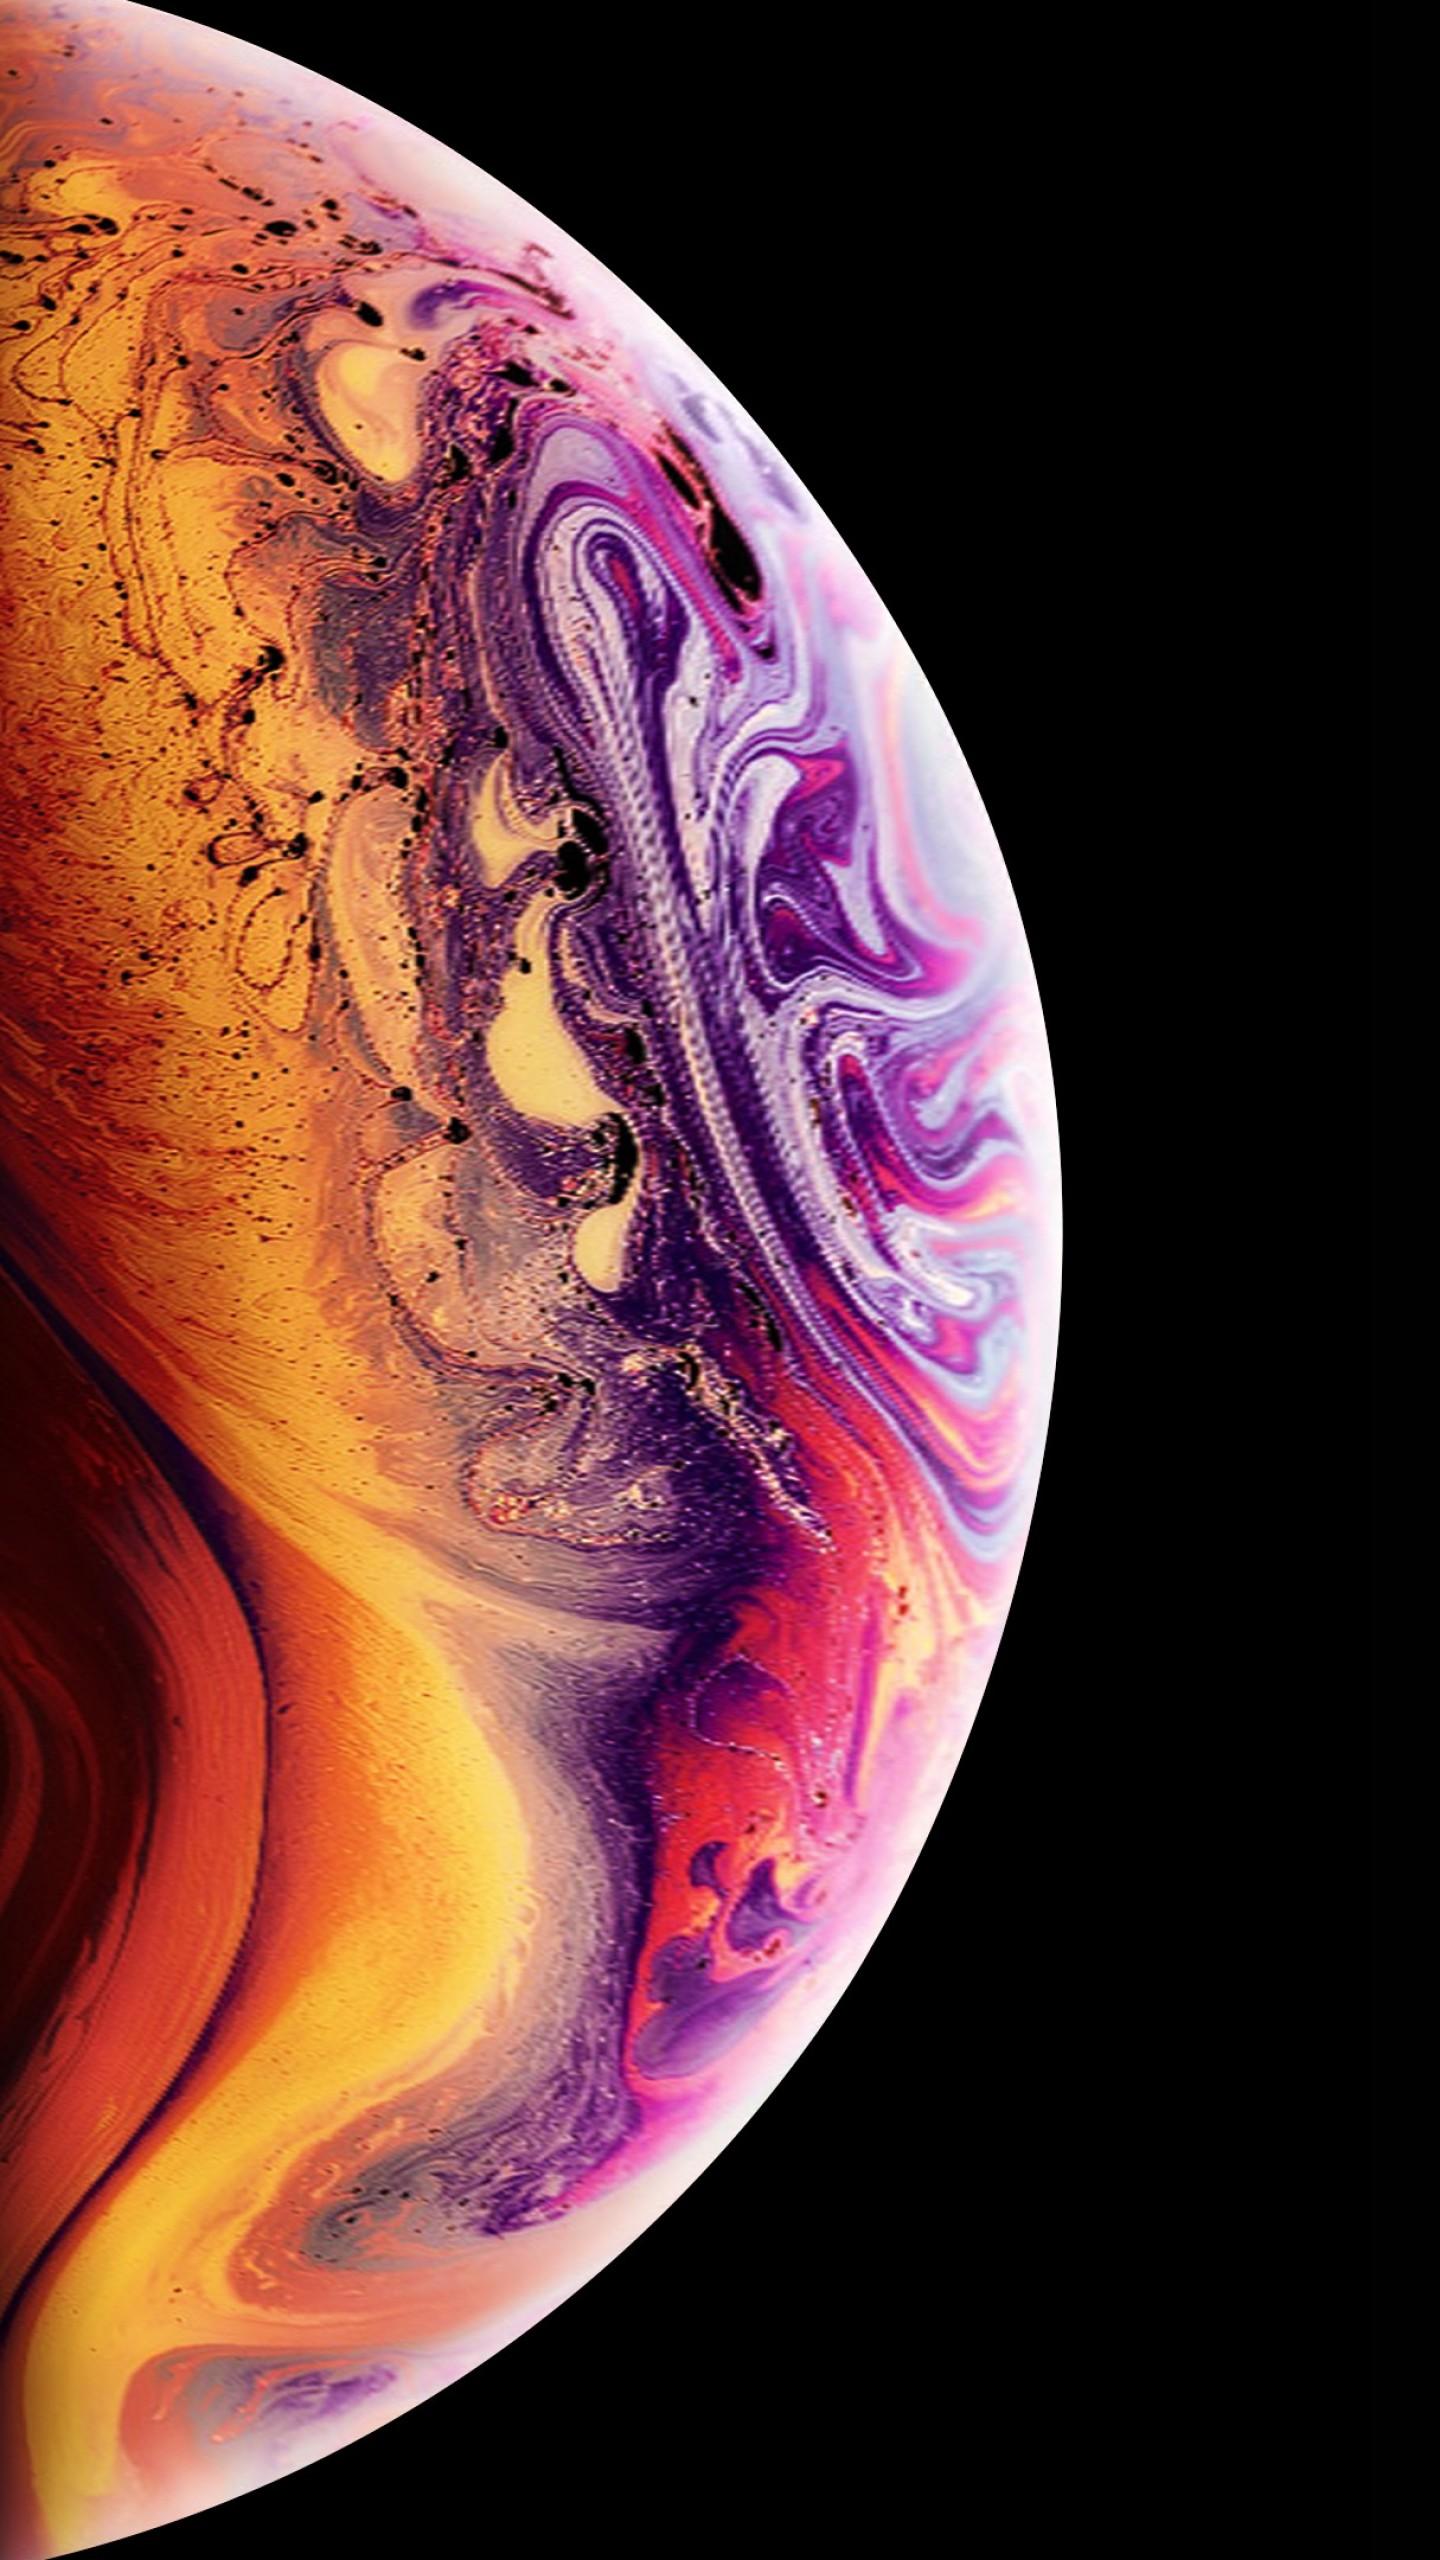 Wallpapers iPhone XS, 4K, OS